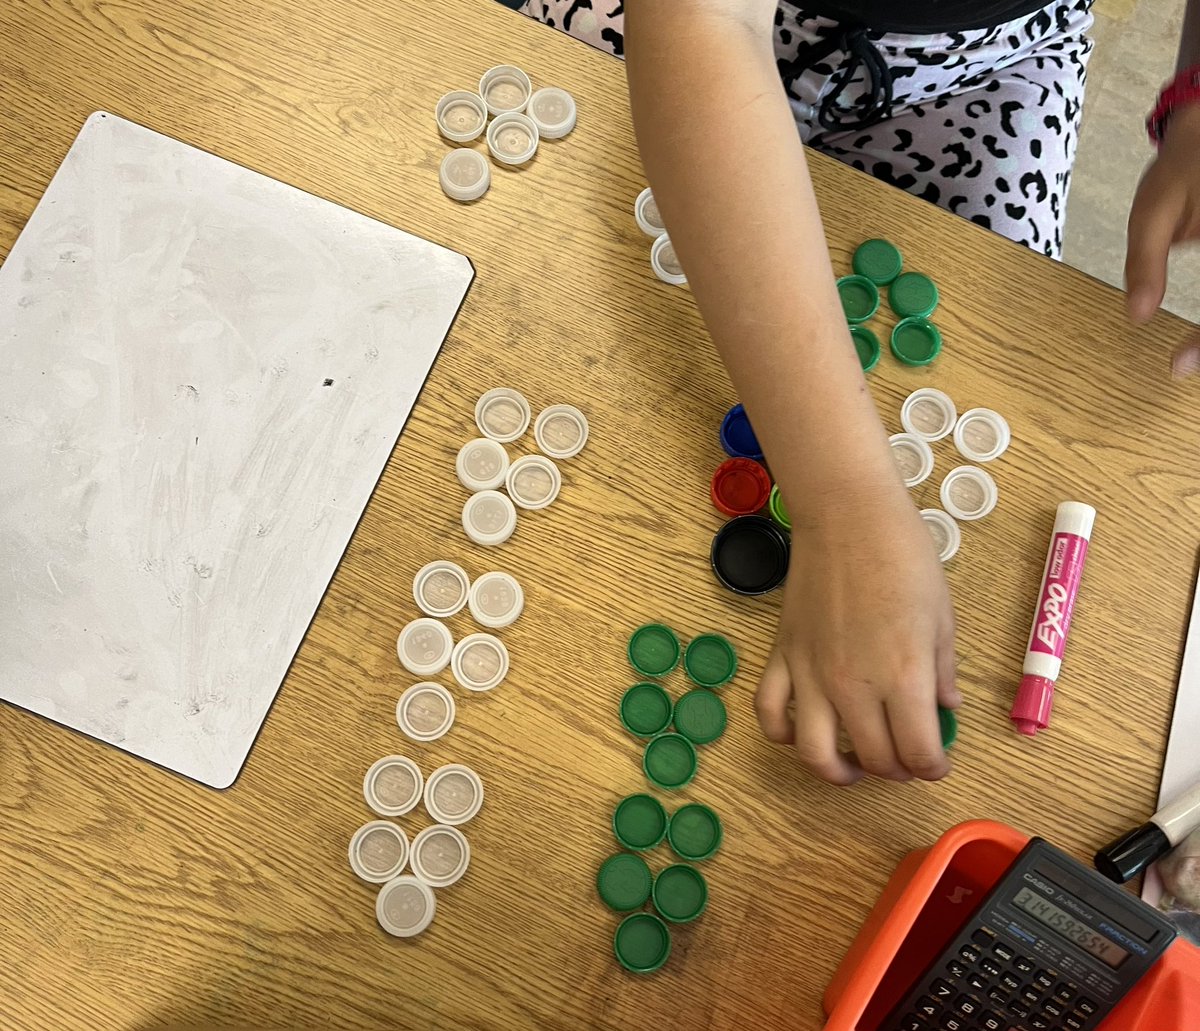 “Ms.Claveau I’m sorting them the math way so it’s easier to count” #iteachmath   @math_sps